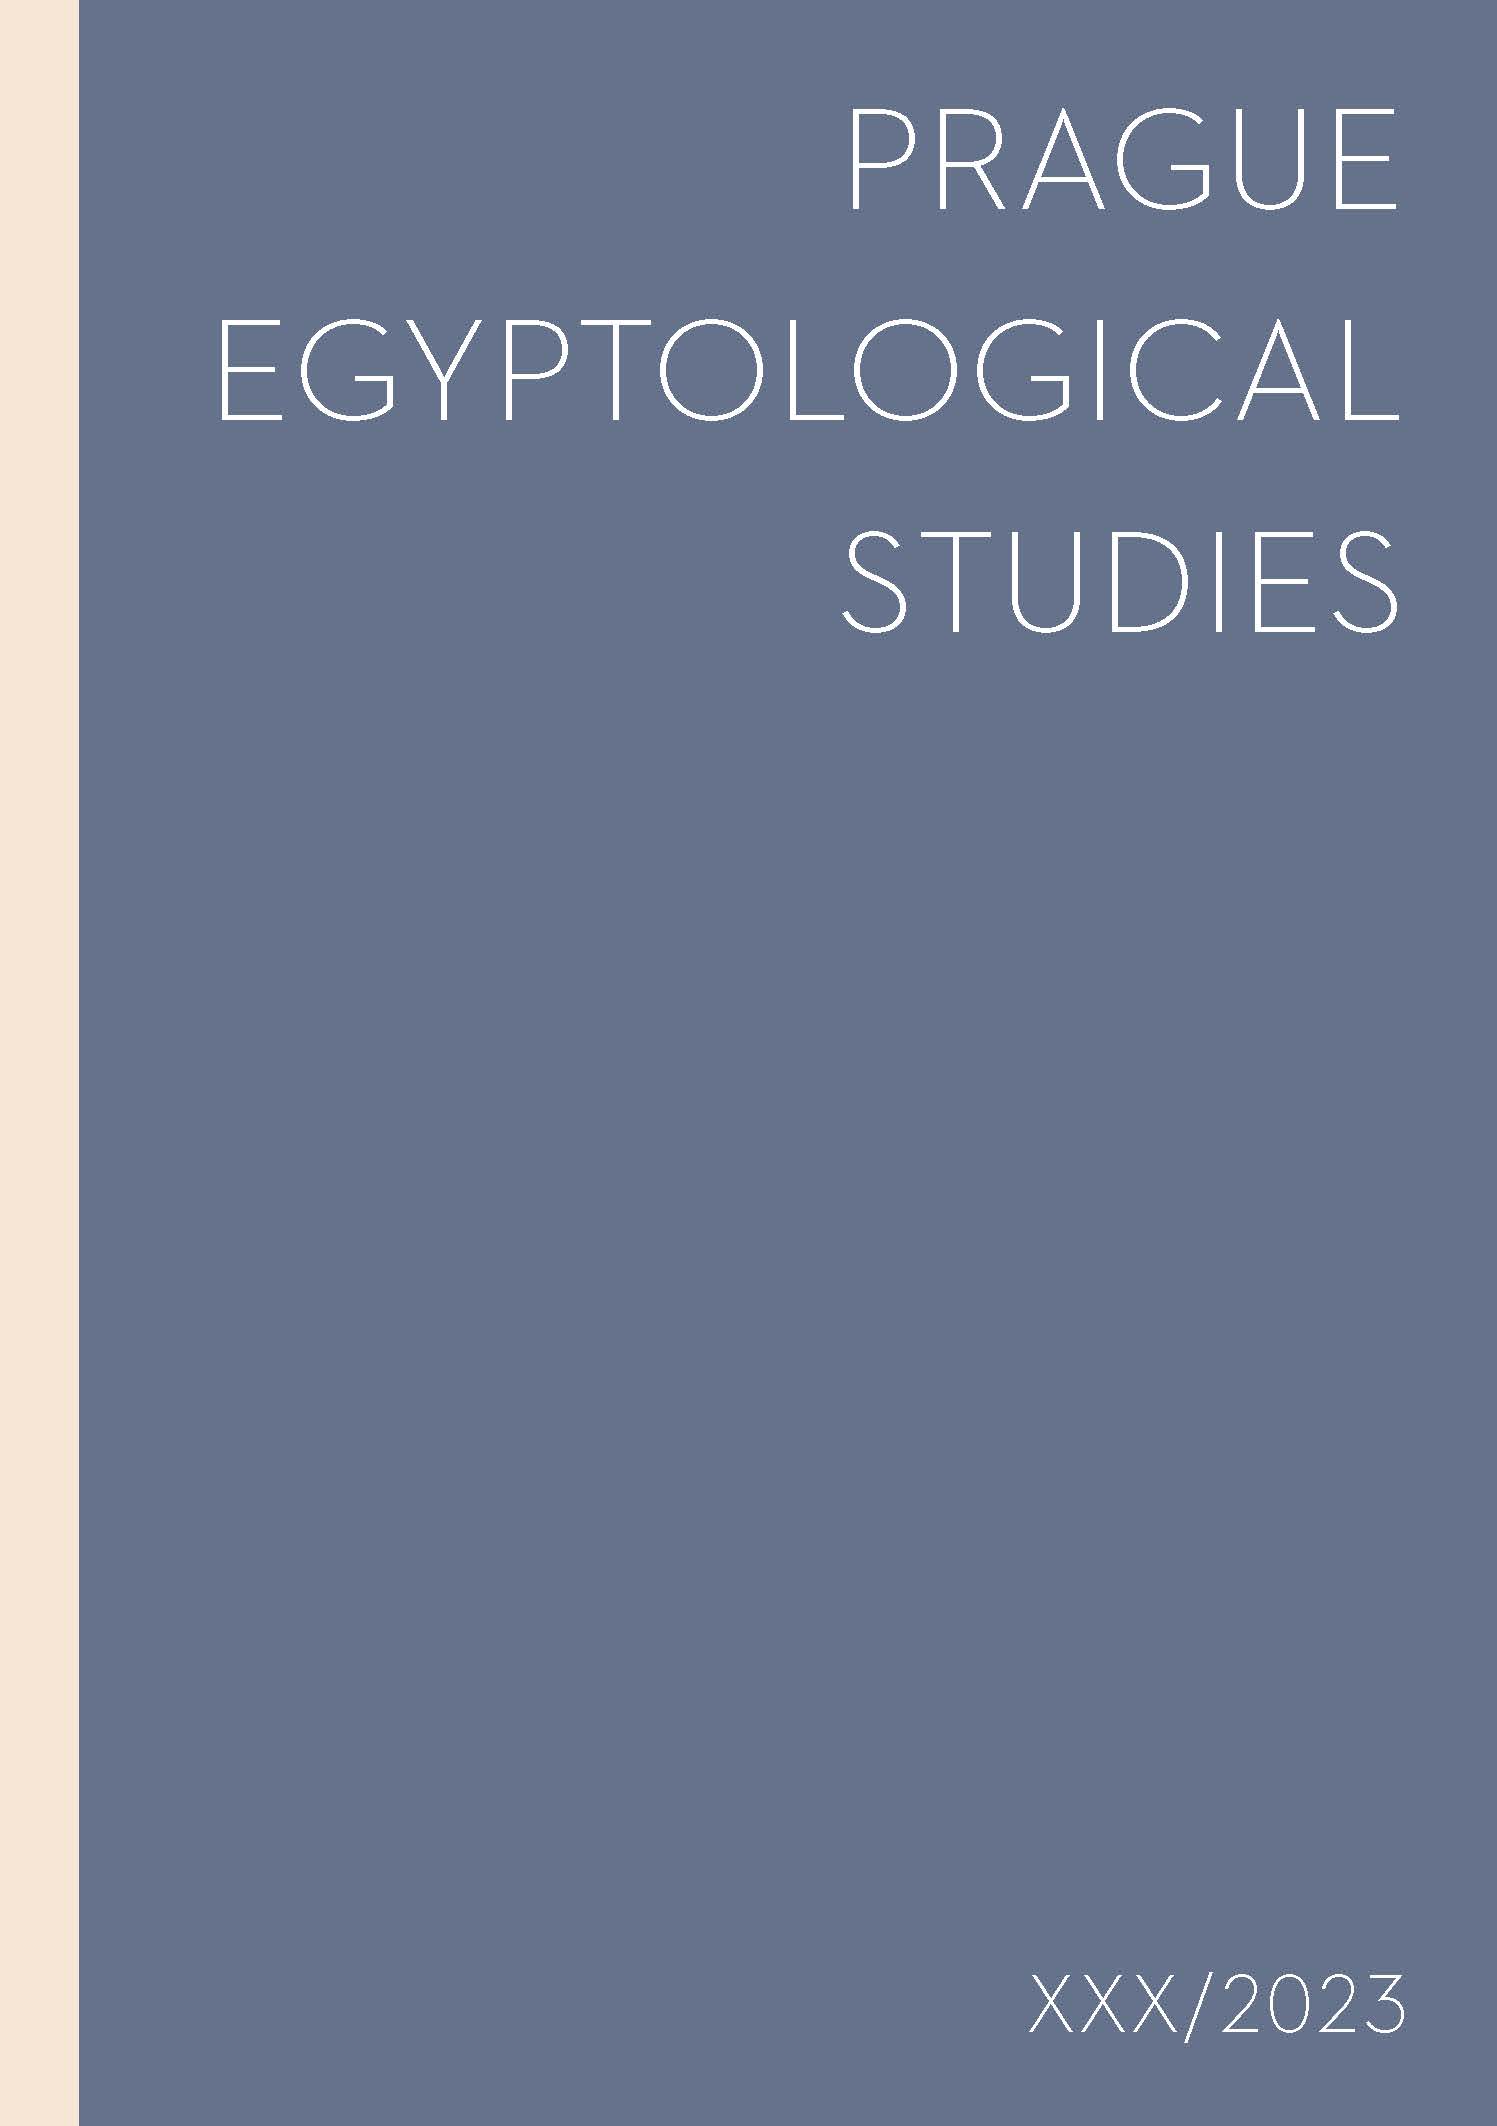 An outdoor exhibition and the Day of Czech Egyptology in Cairo Cover Image